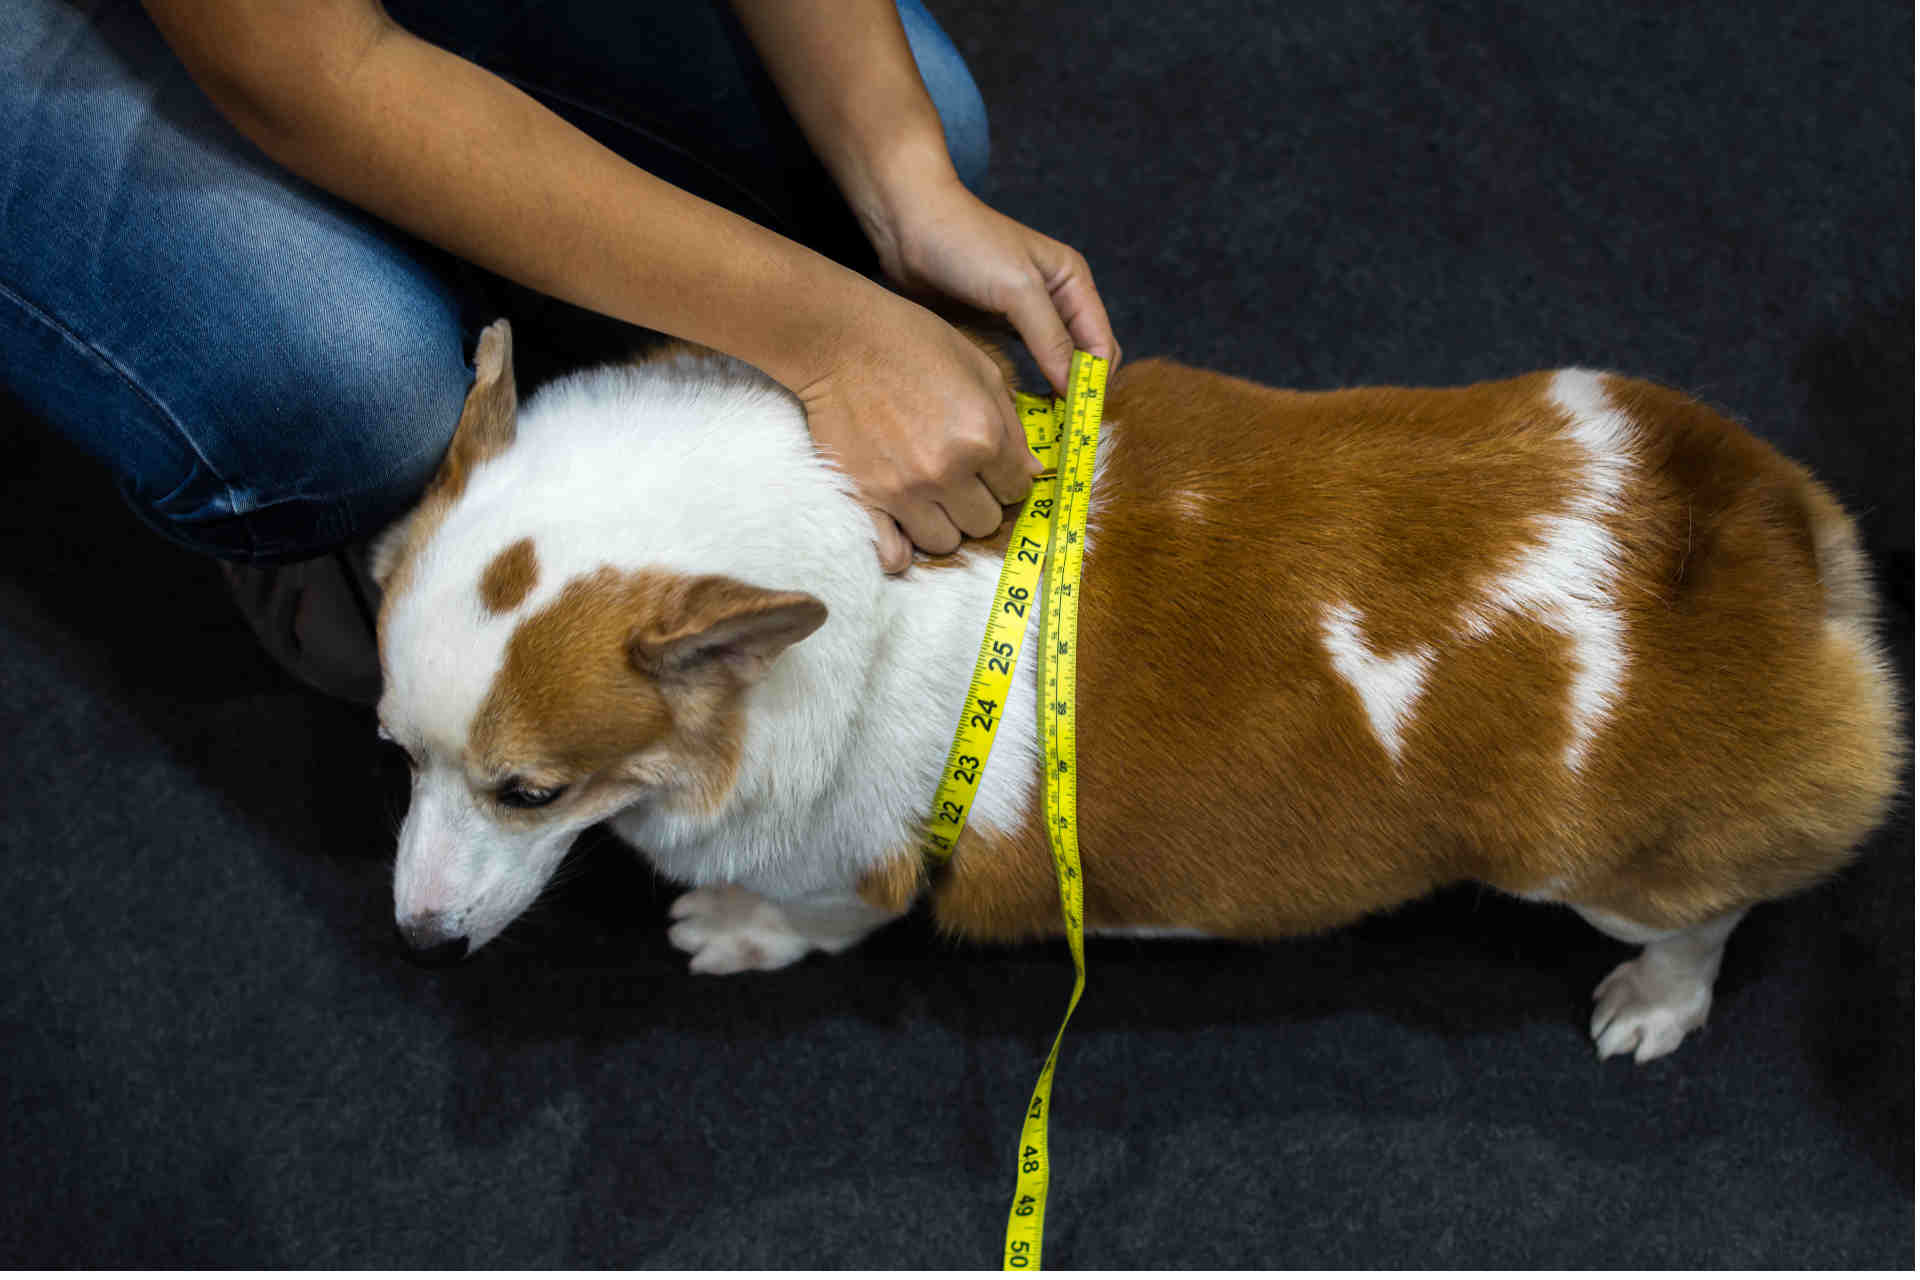 Picture of an obese dog being measured